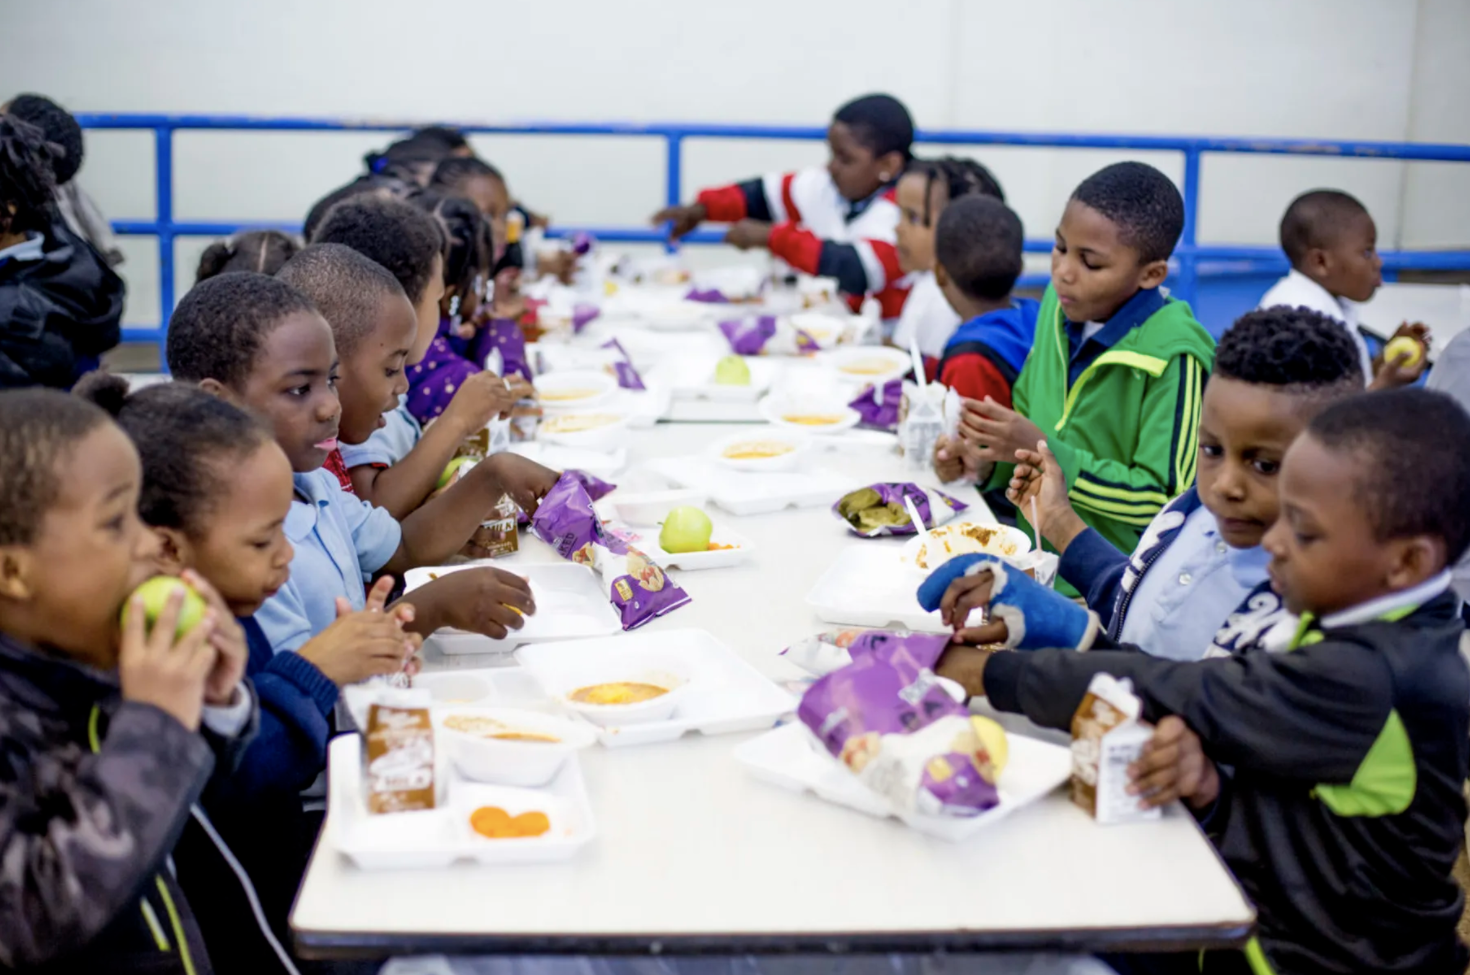 Universal lunch may help NYC students view their schools as safer places, a report finds